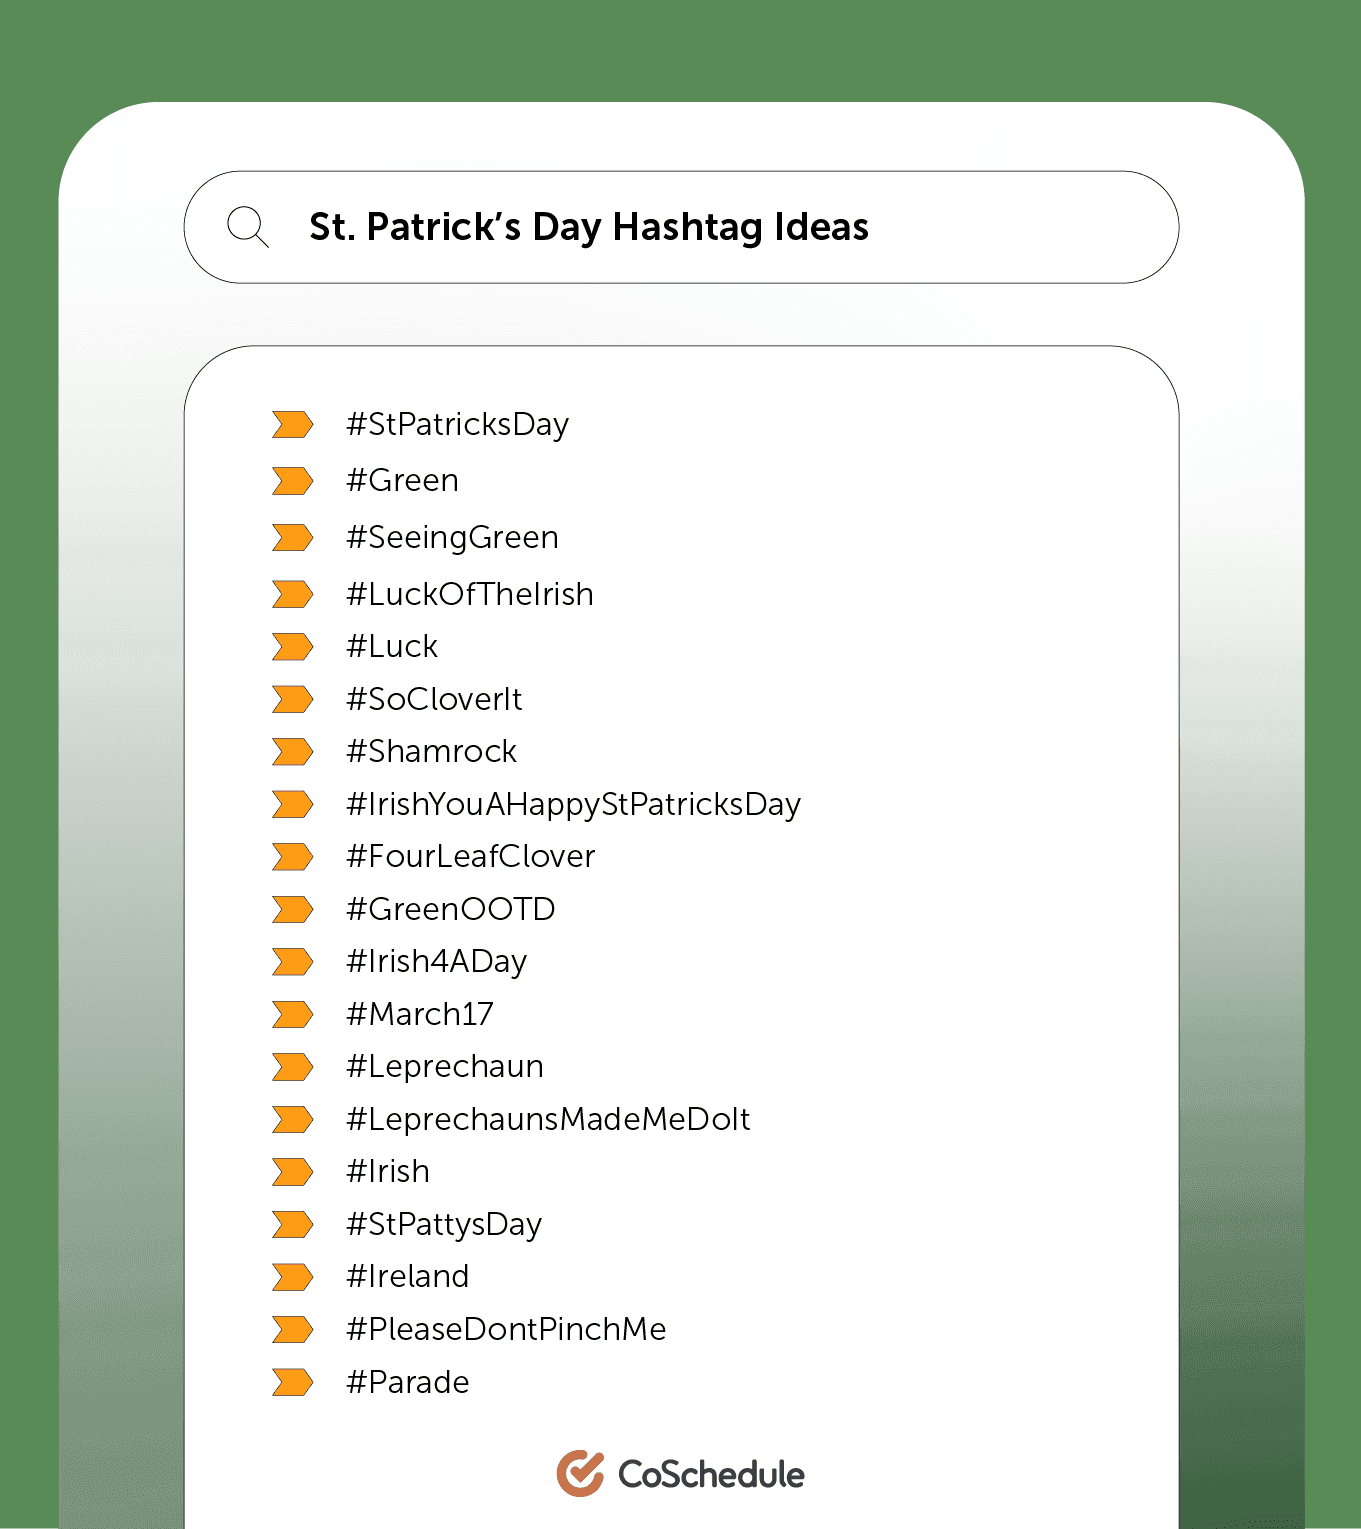 St. Patrick's day hashtag ideas from CoSchedule